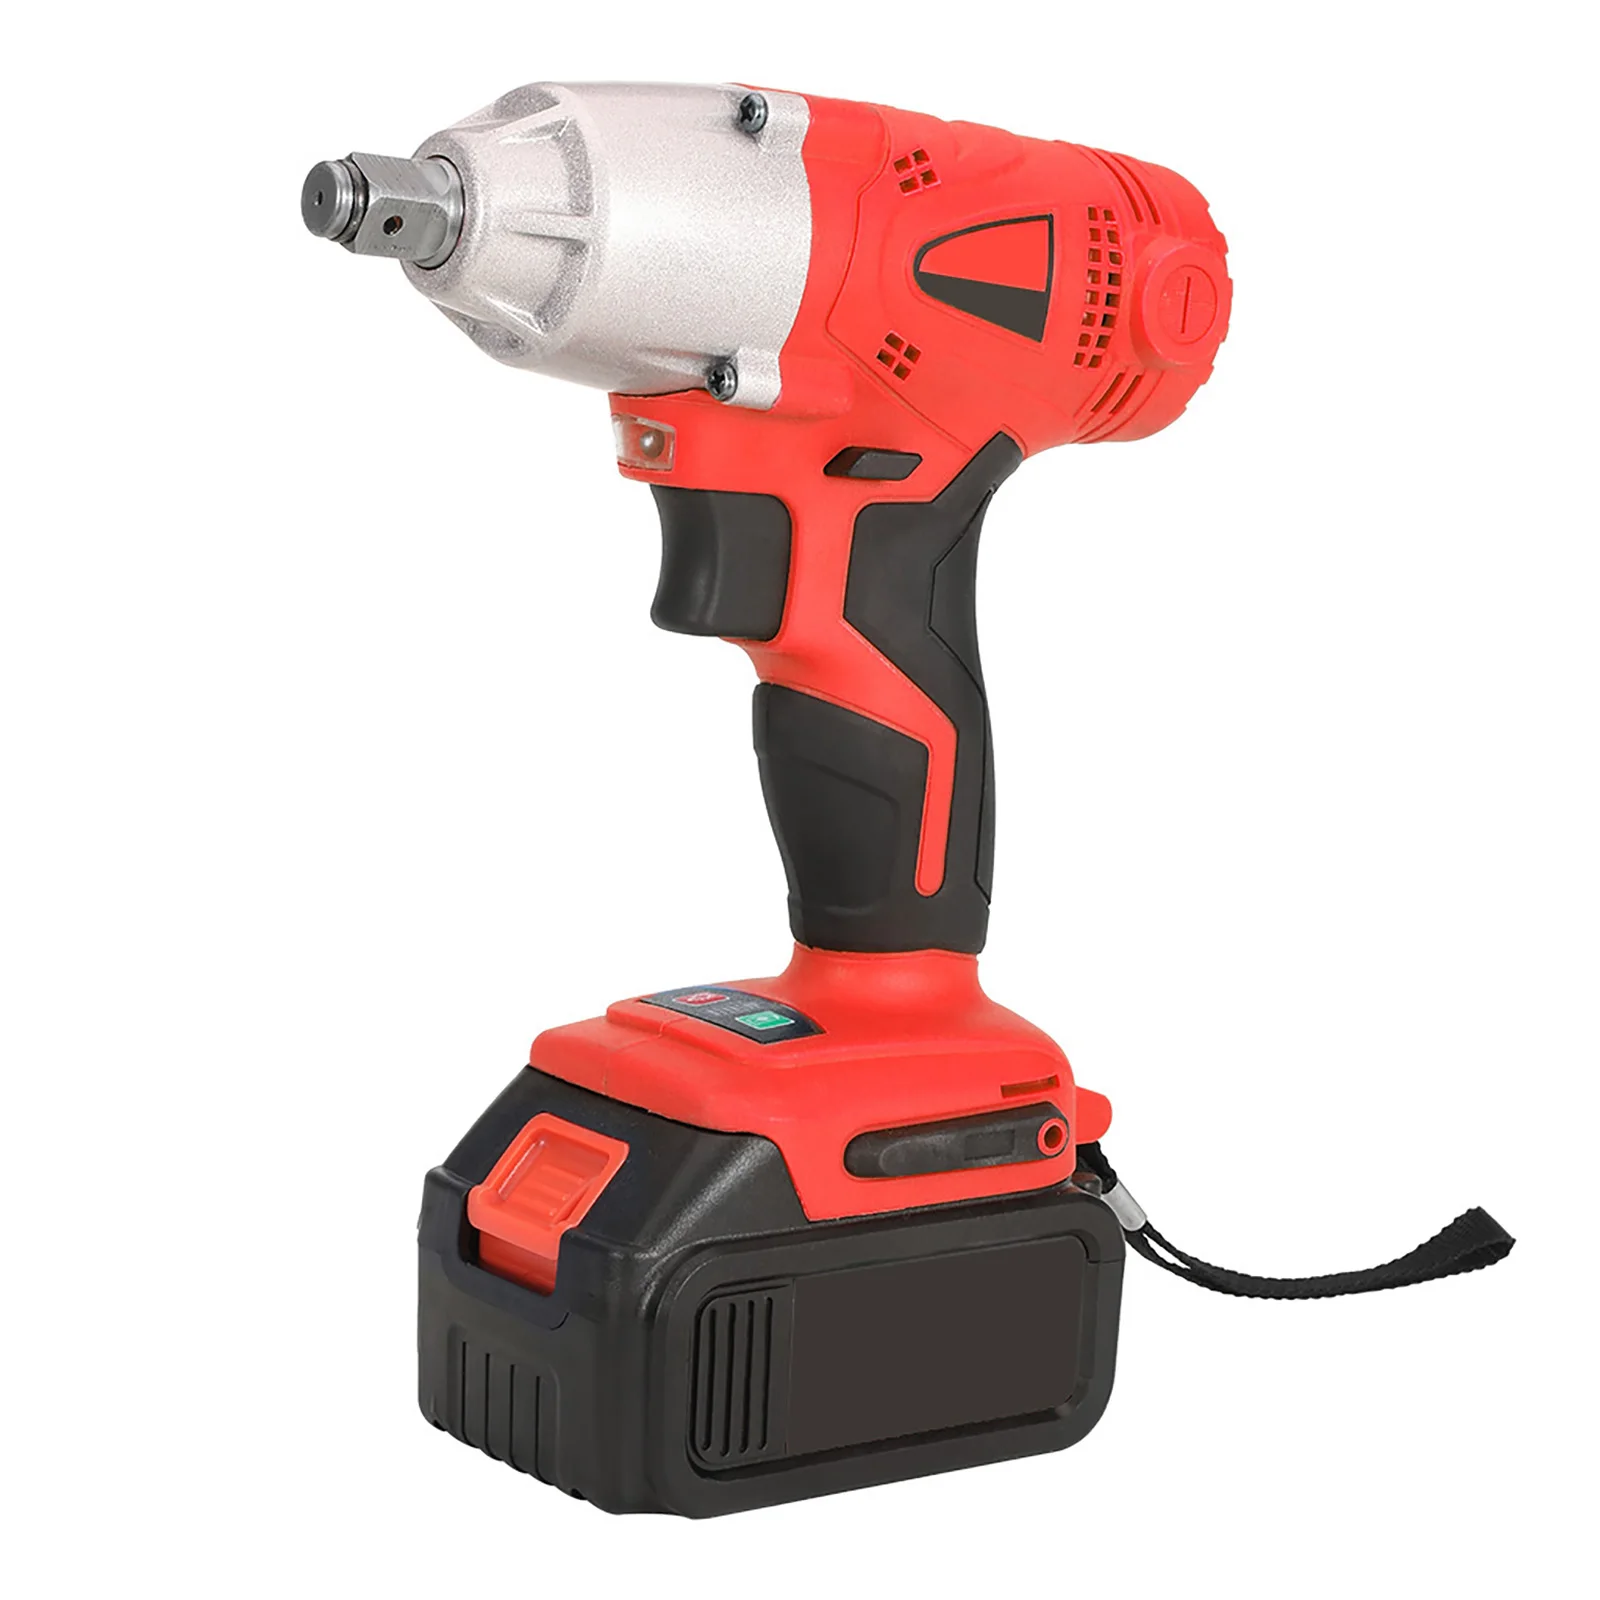 Electric Impact Wrench 110~240V 520N.M Brushless Power Tool No-load Speed 4200RPM with Two 21V 3.0AH 15000mah Lithium Batteries